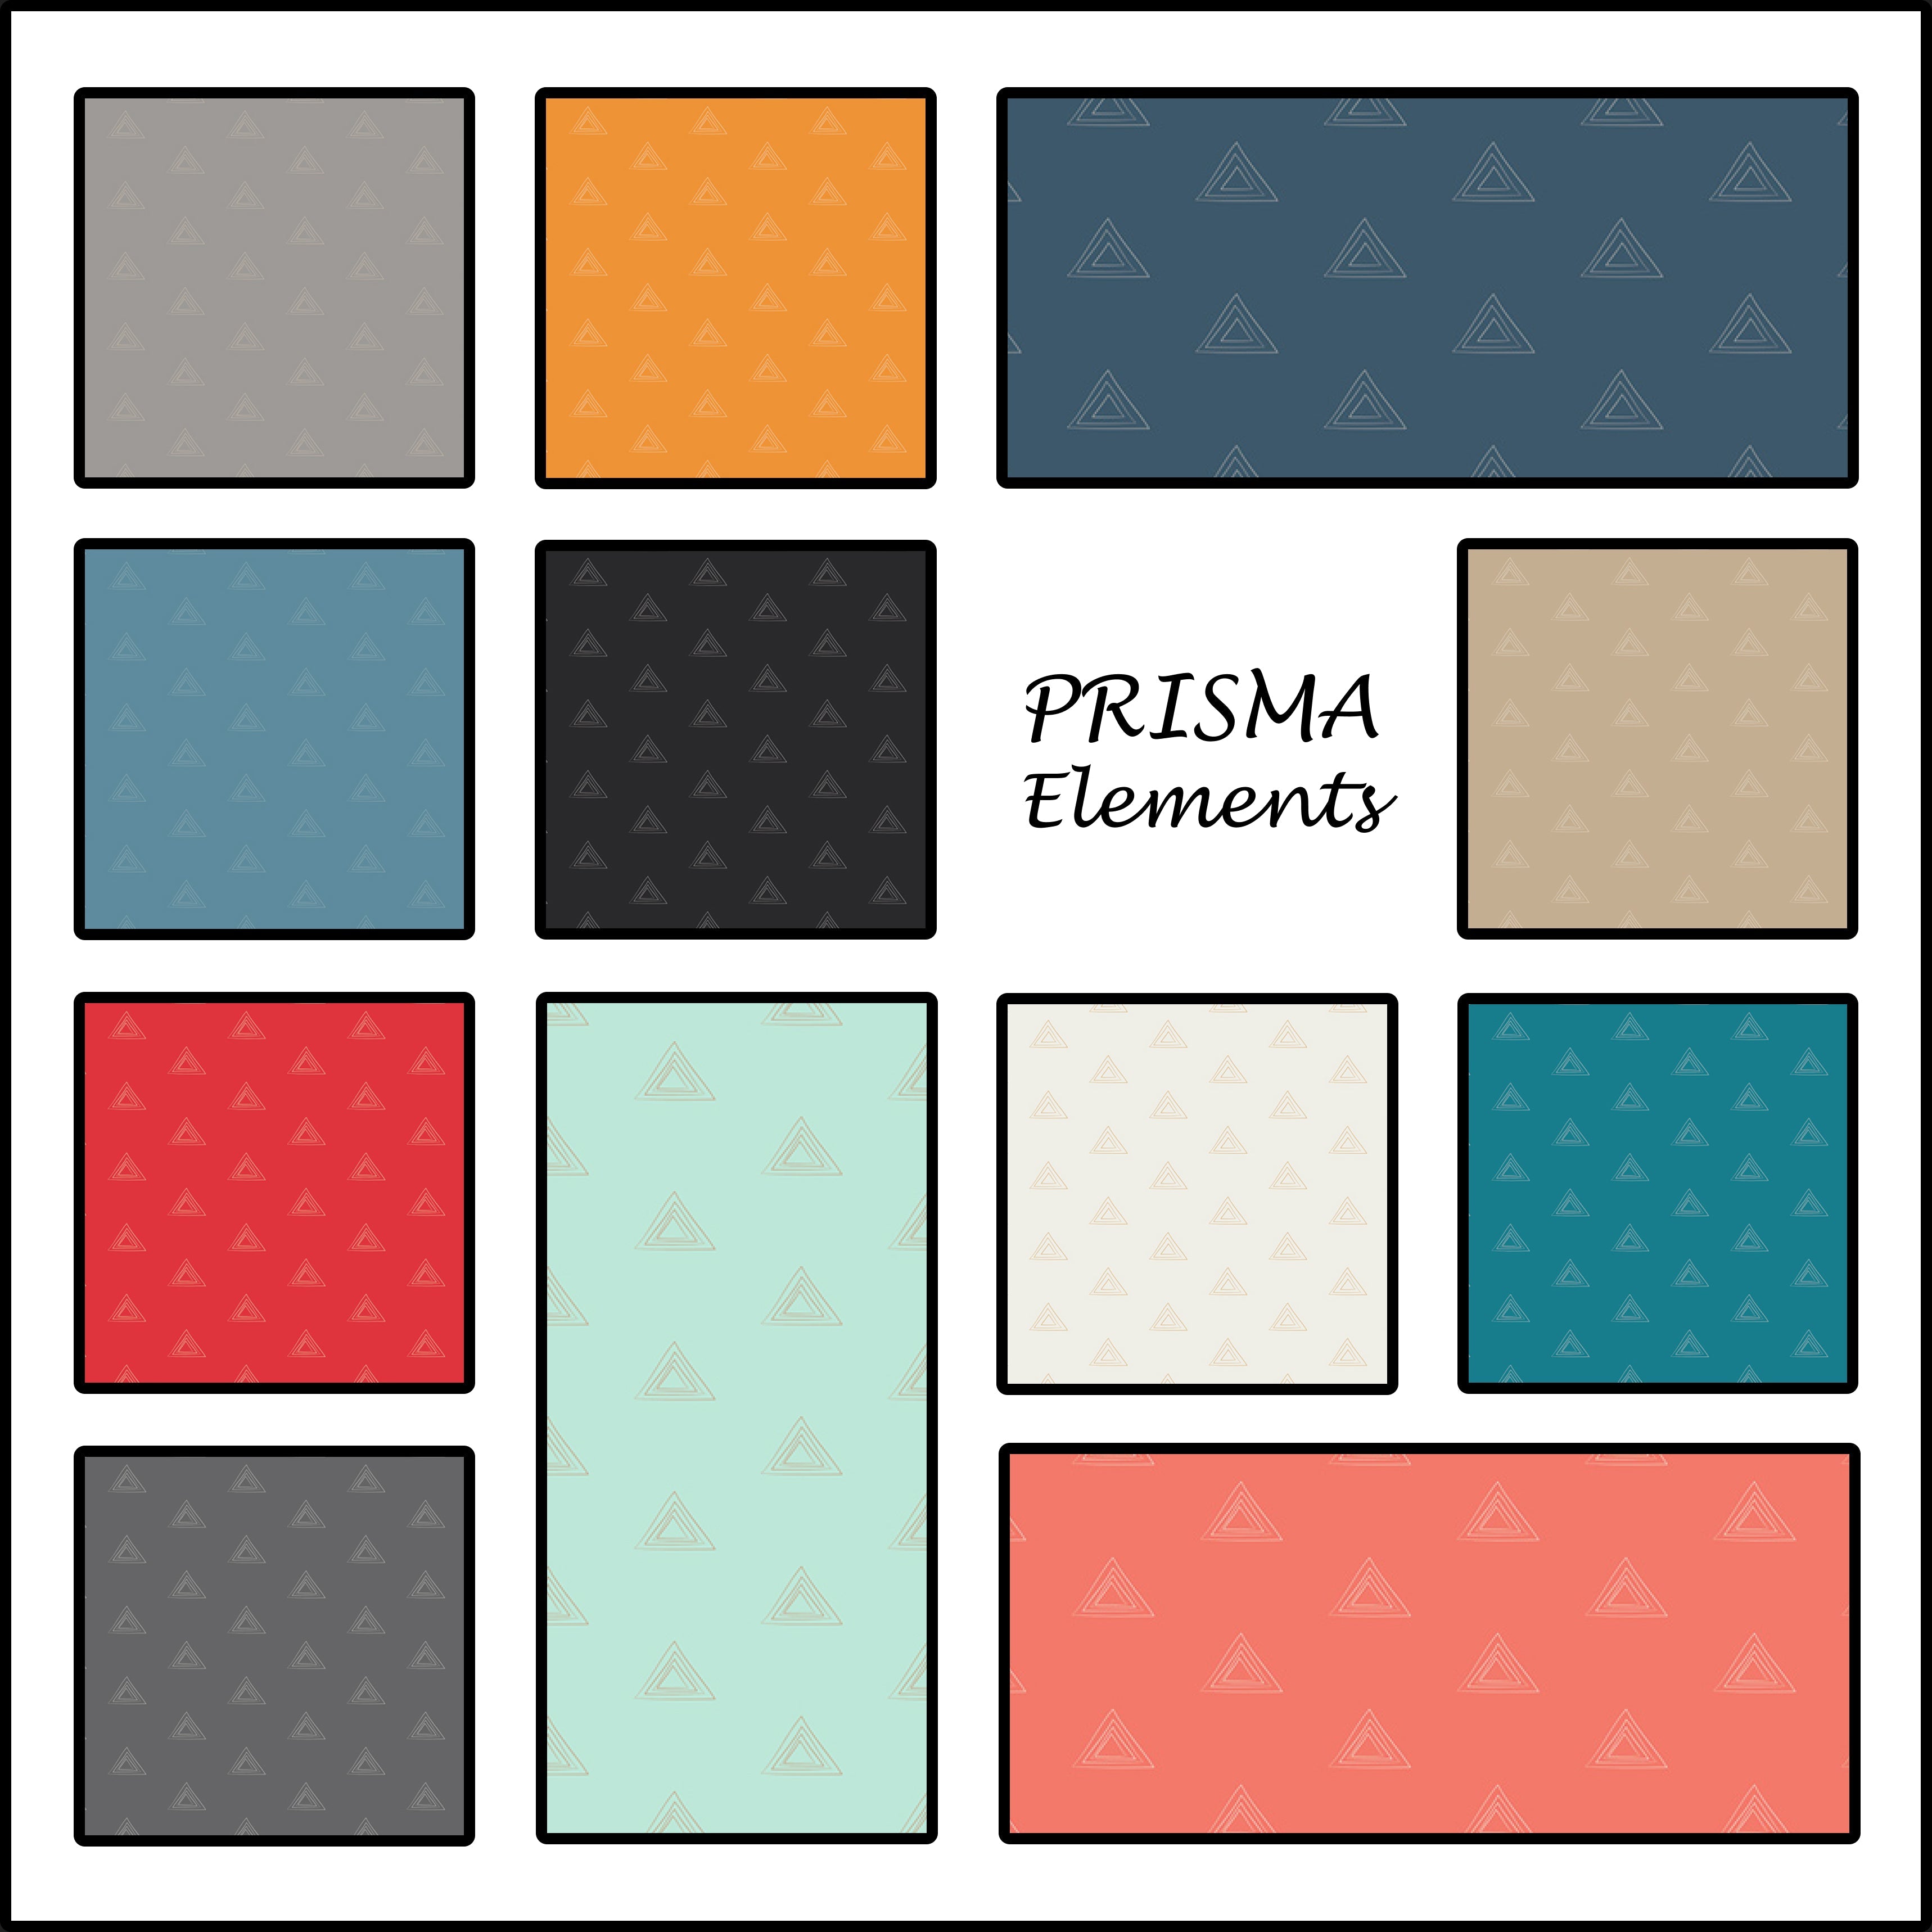 The image shows twelve fabric swatches from the line “PRISMA Elements” by Art Gallery Fabrics. The colors are mostly muted with a few pops of red and orange, and the pattern is the same throughout the fabric line – artistic triangles repeating.